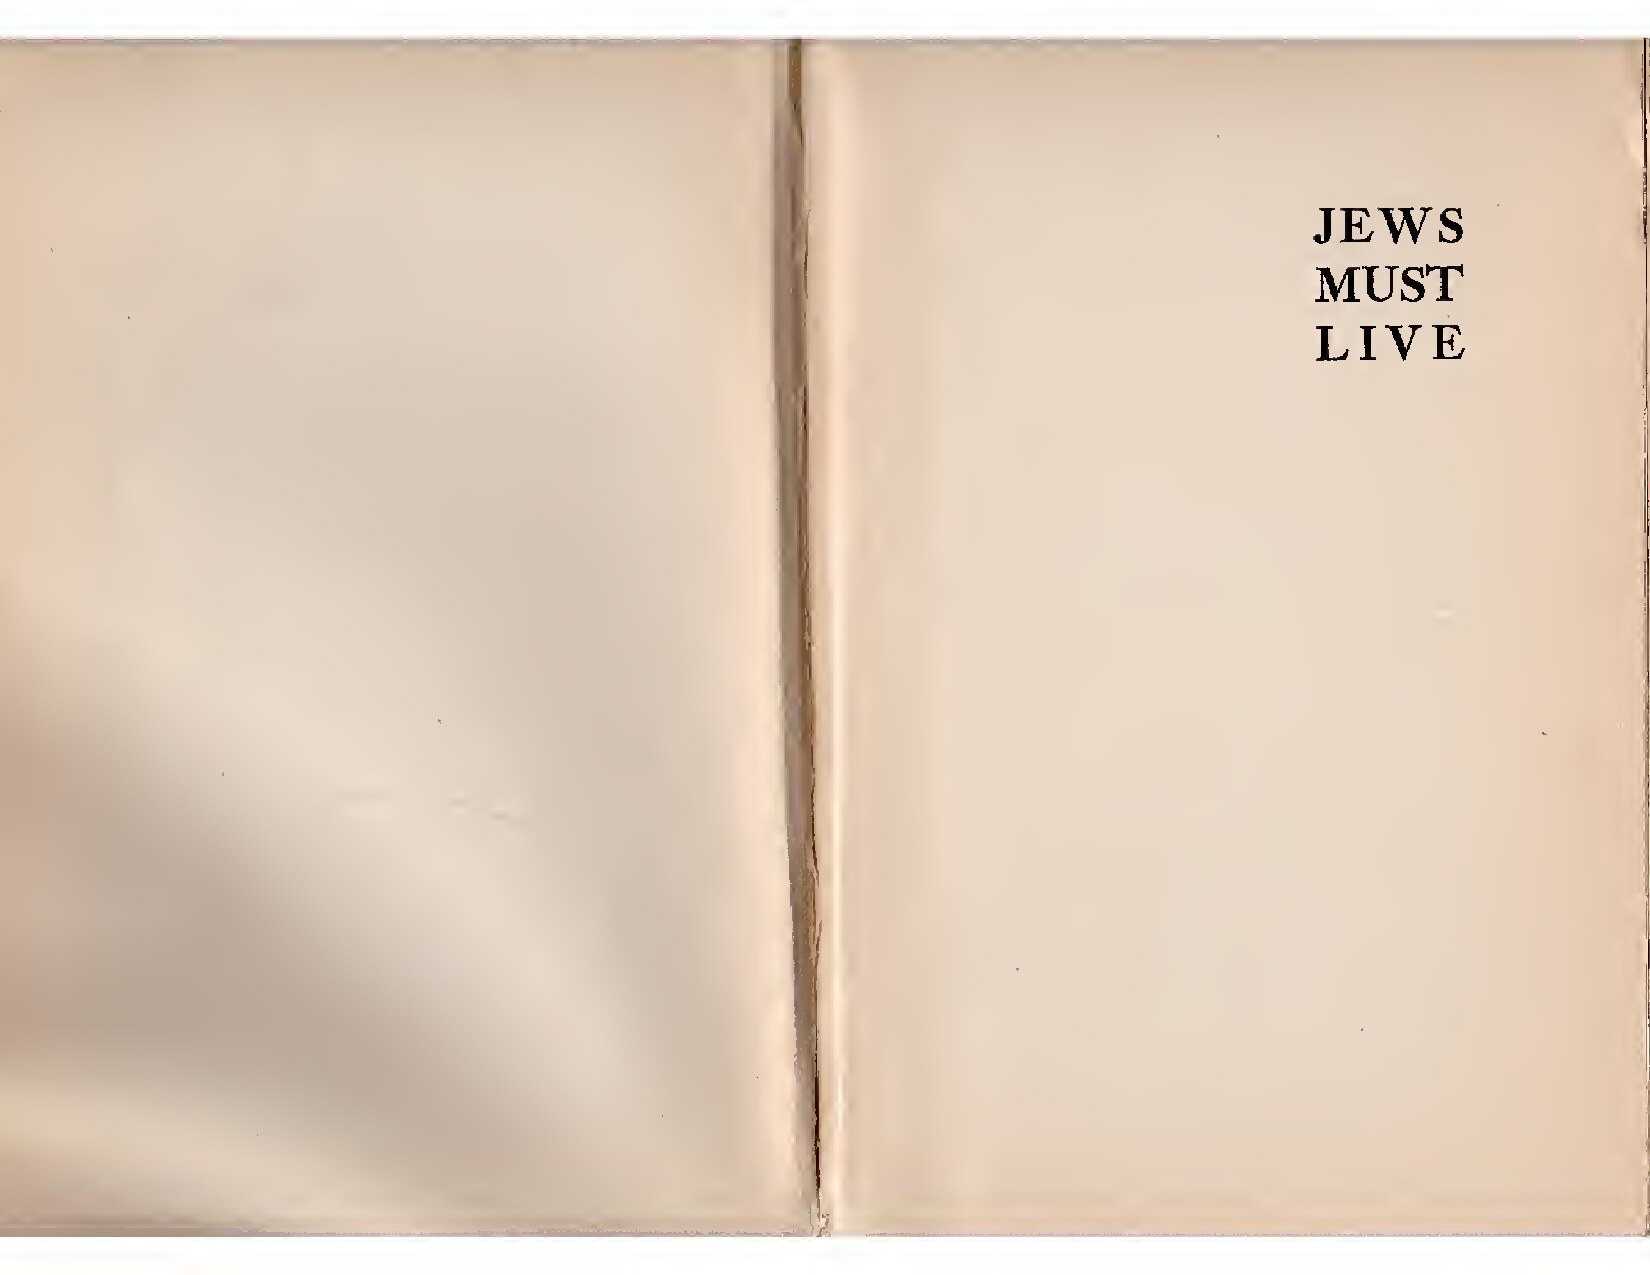 Jews must live; an account of the persecution of the world by Israel on all the frontiers of civilization